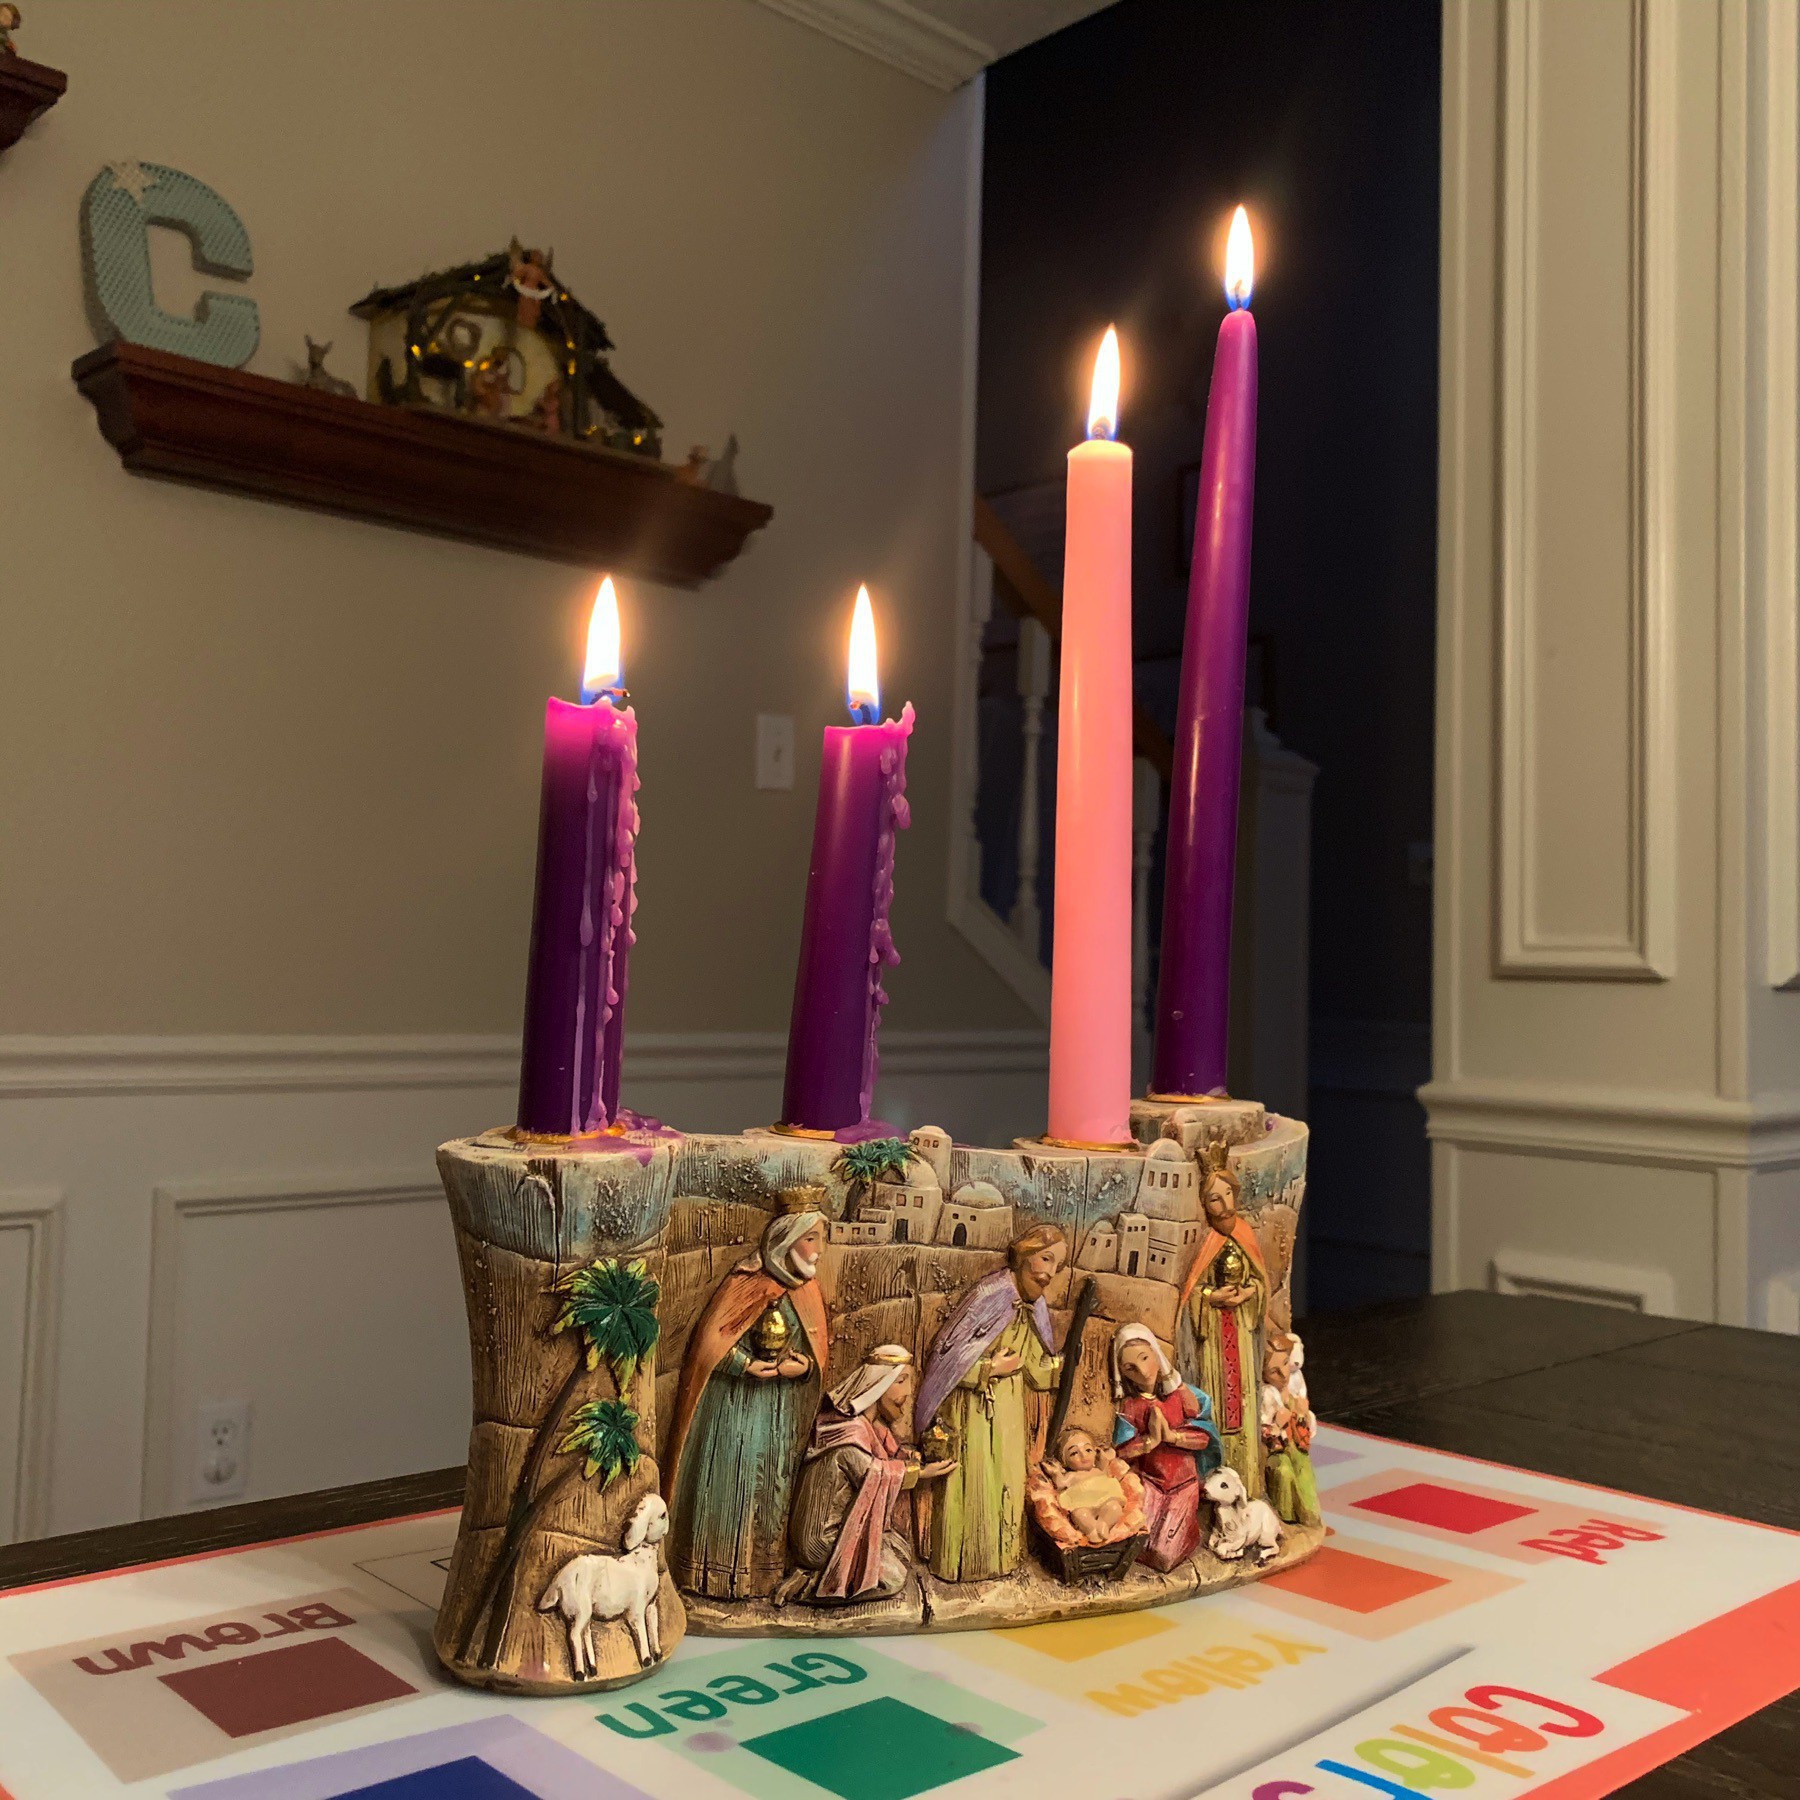 Four Advent candles lit with nativity scene in the background.